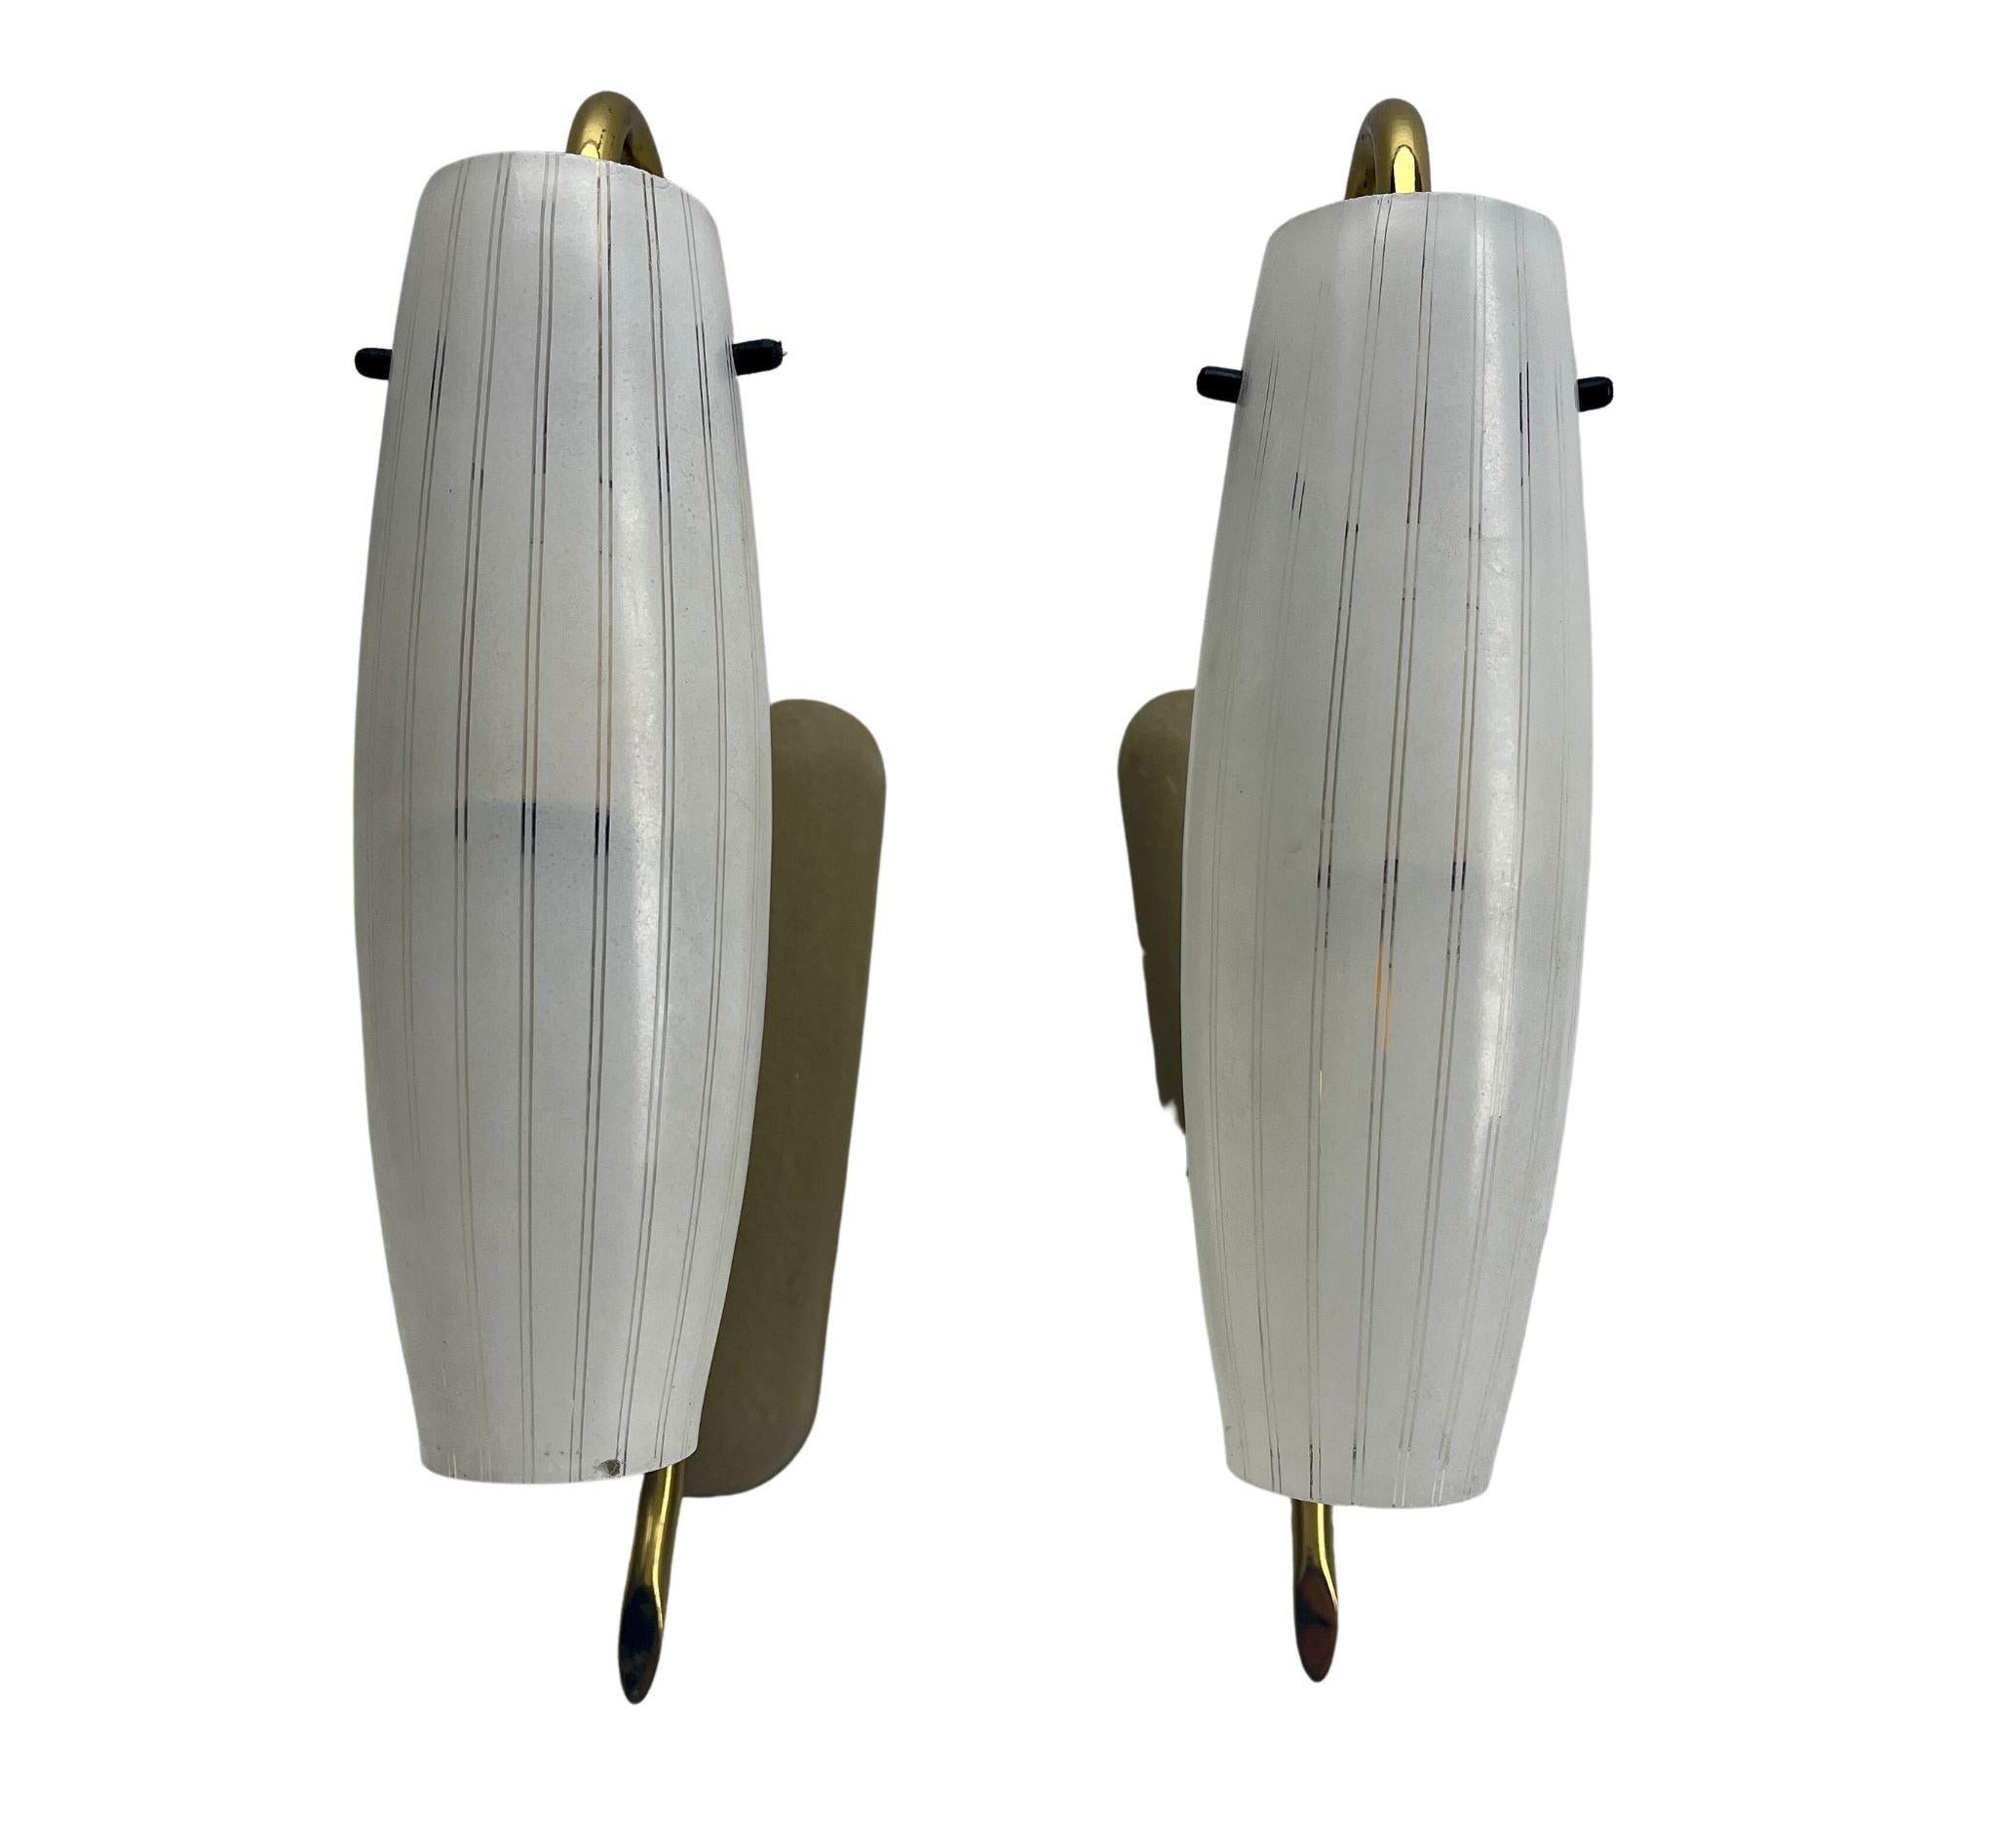 Vintage Pair of 1 Arm Wall Mount Lamps in the Style of Stilnovo, Italian, 1960s For Sale 1